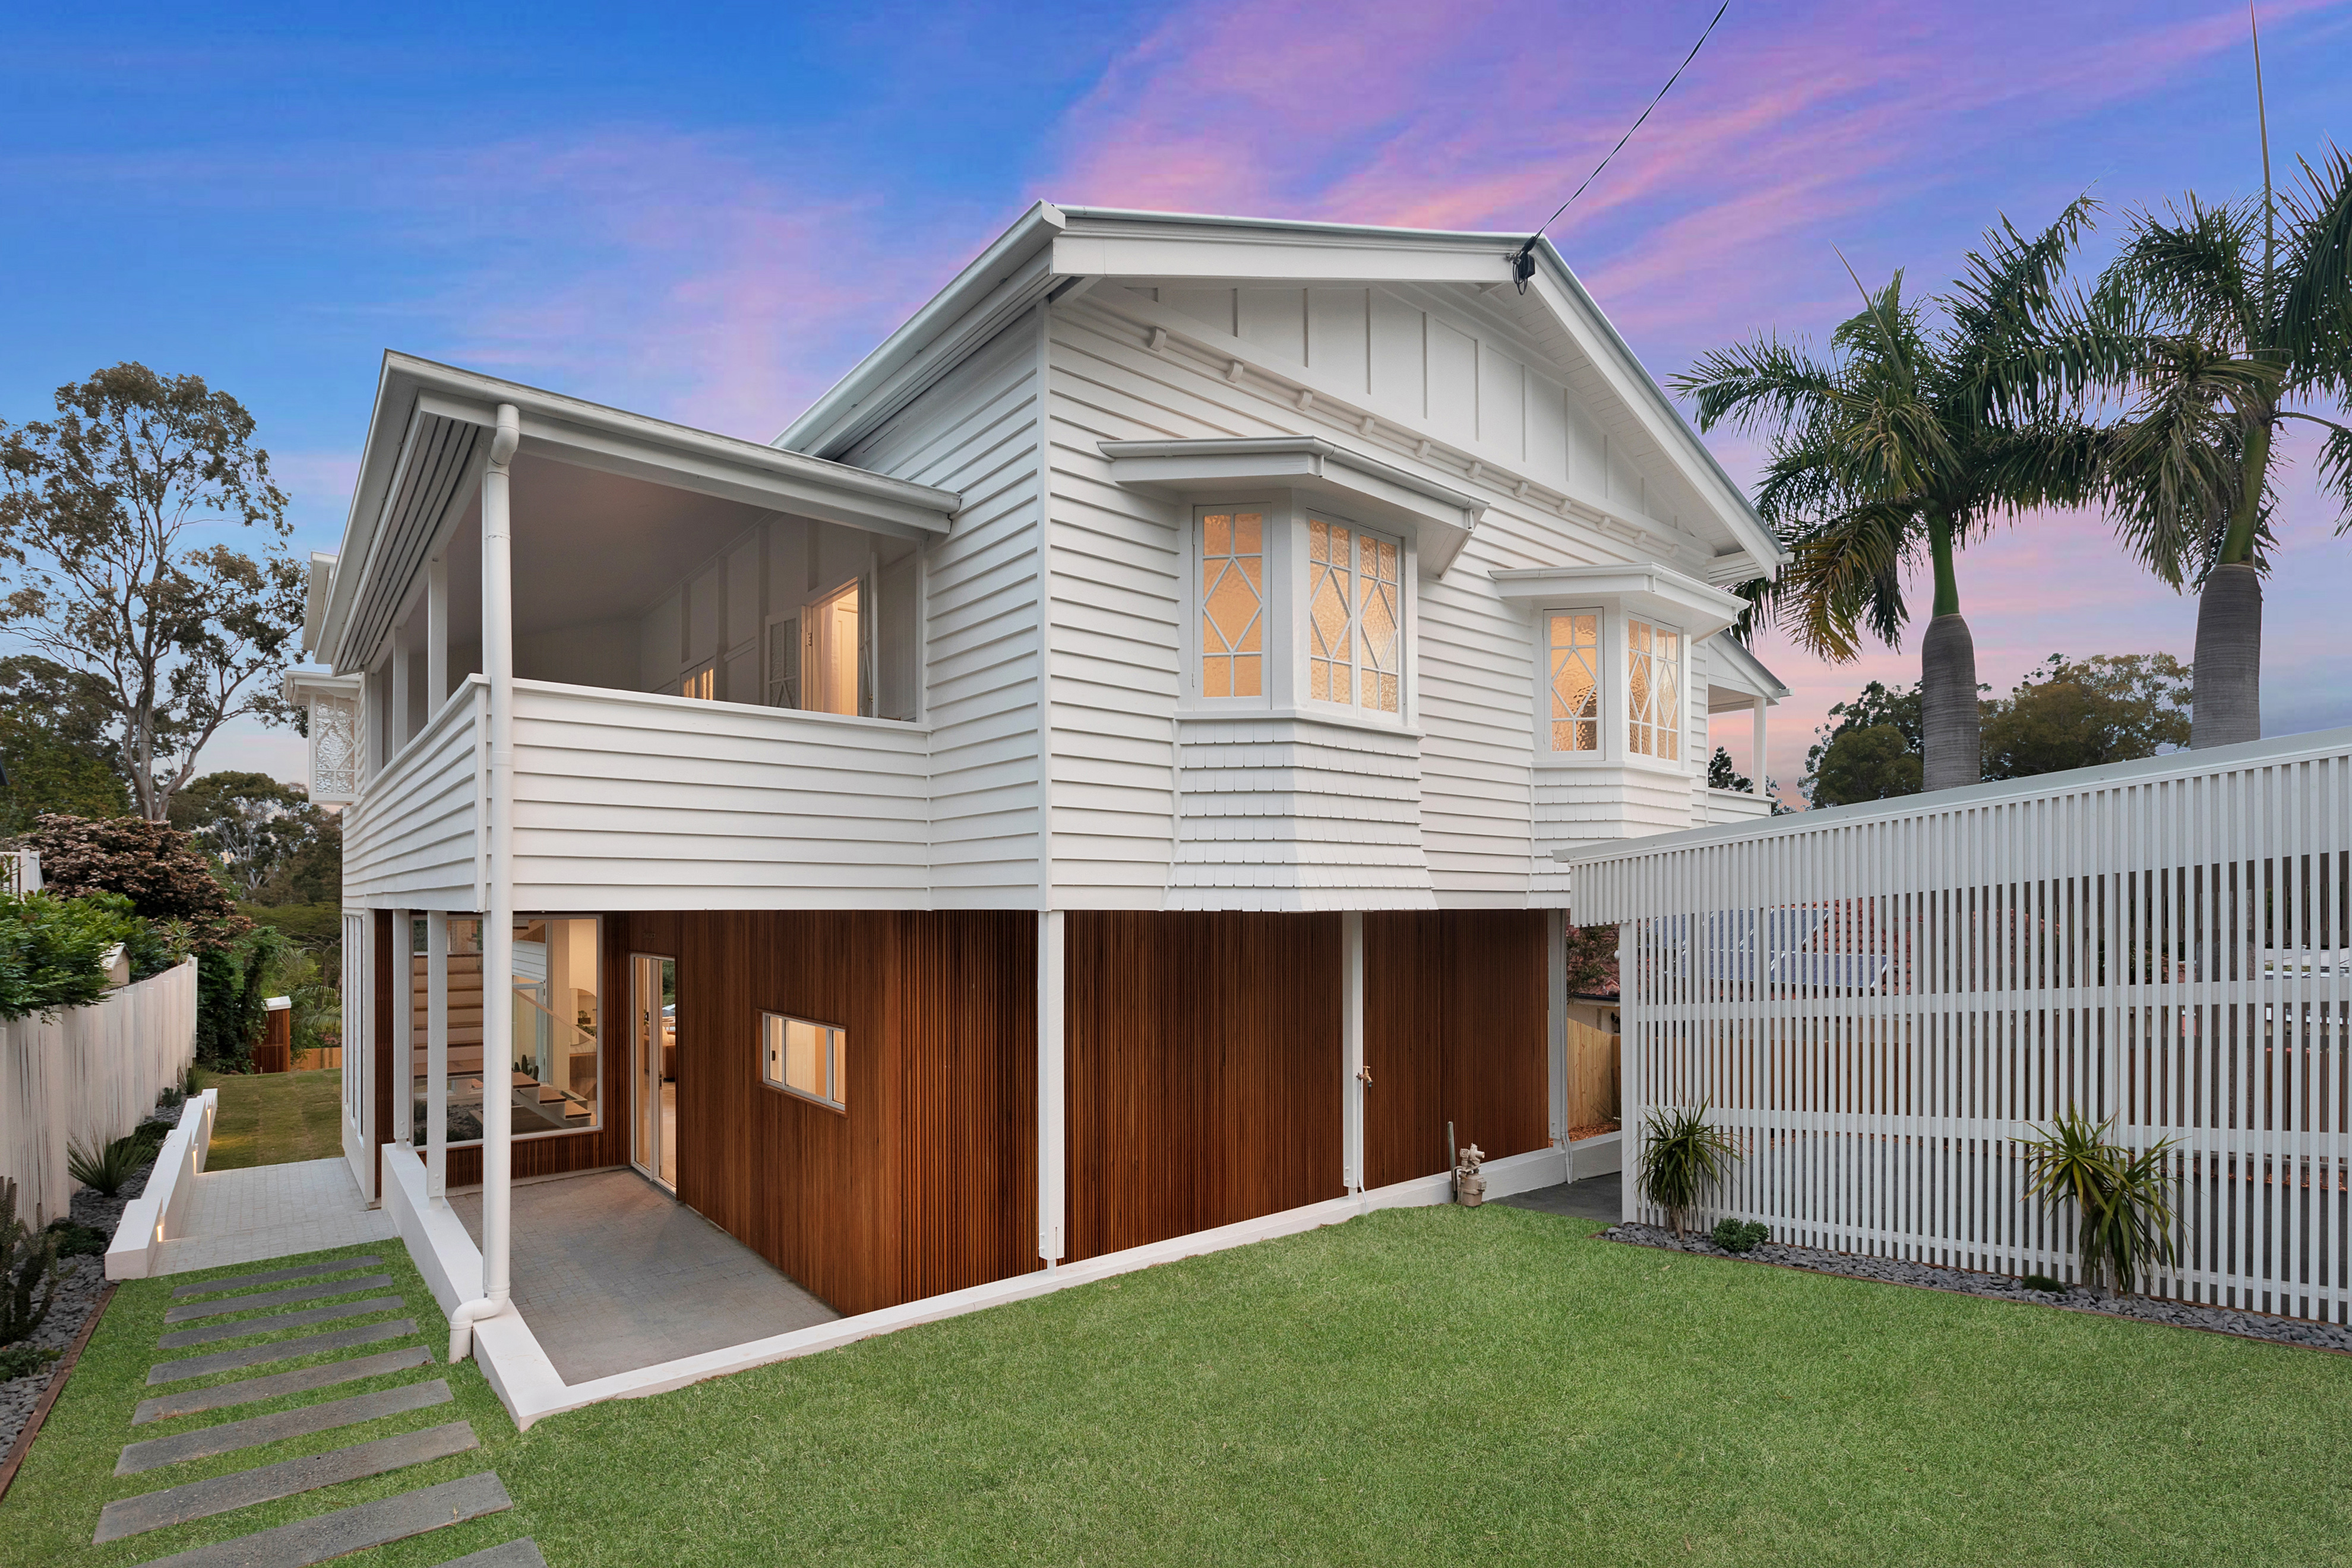 The new normal is a real treat for Brisbane’s prestige property market.